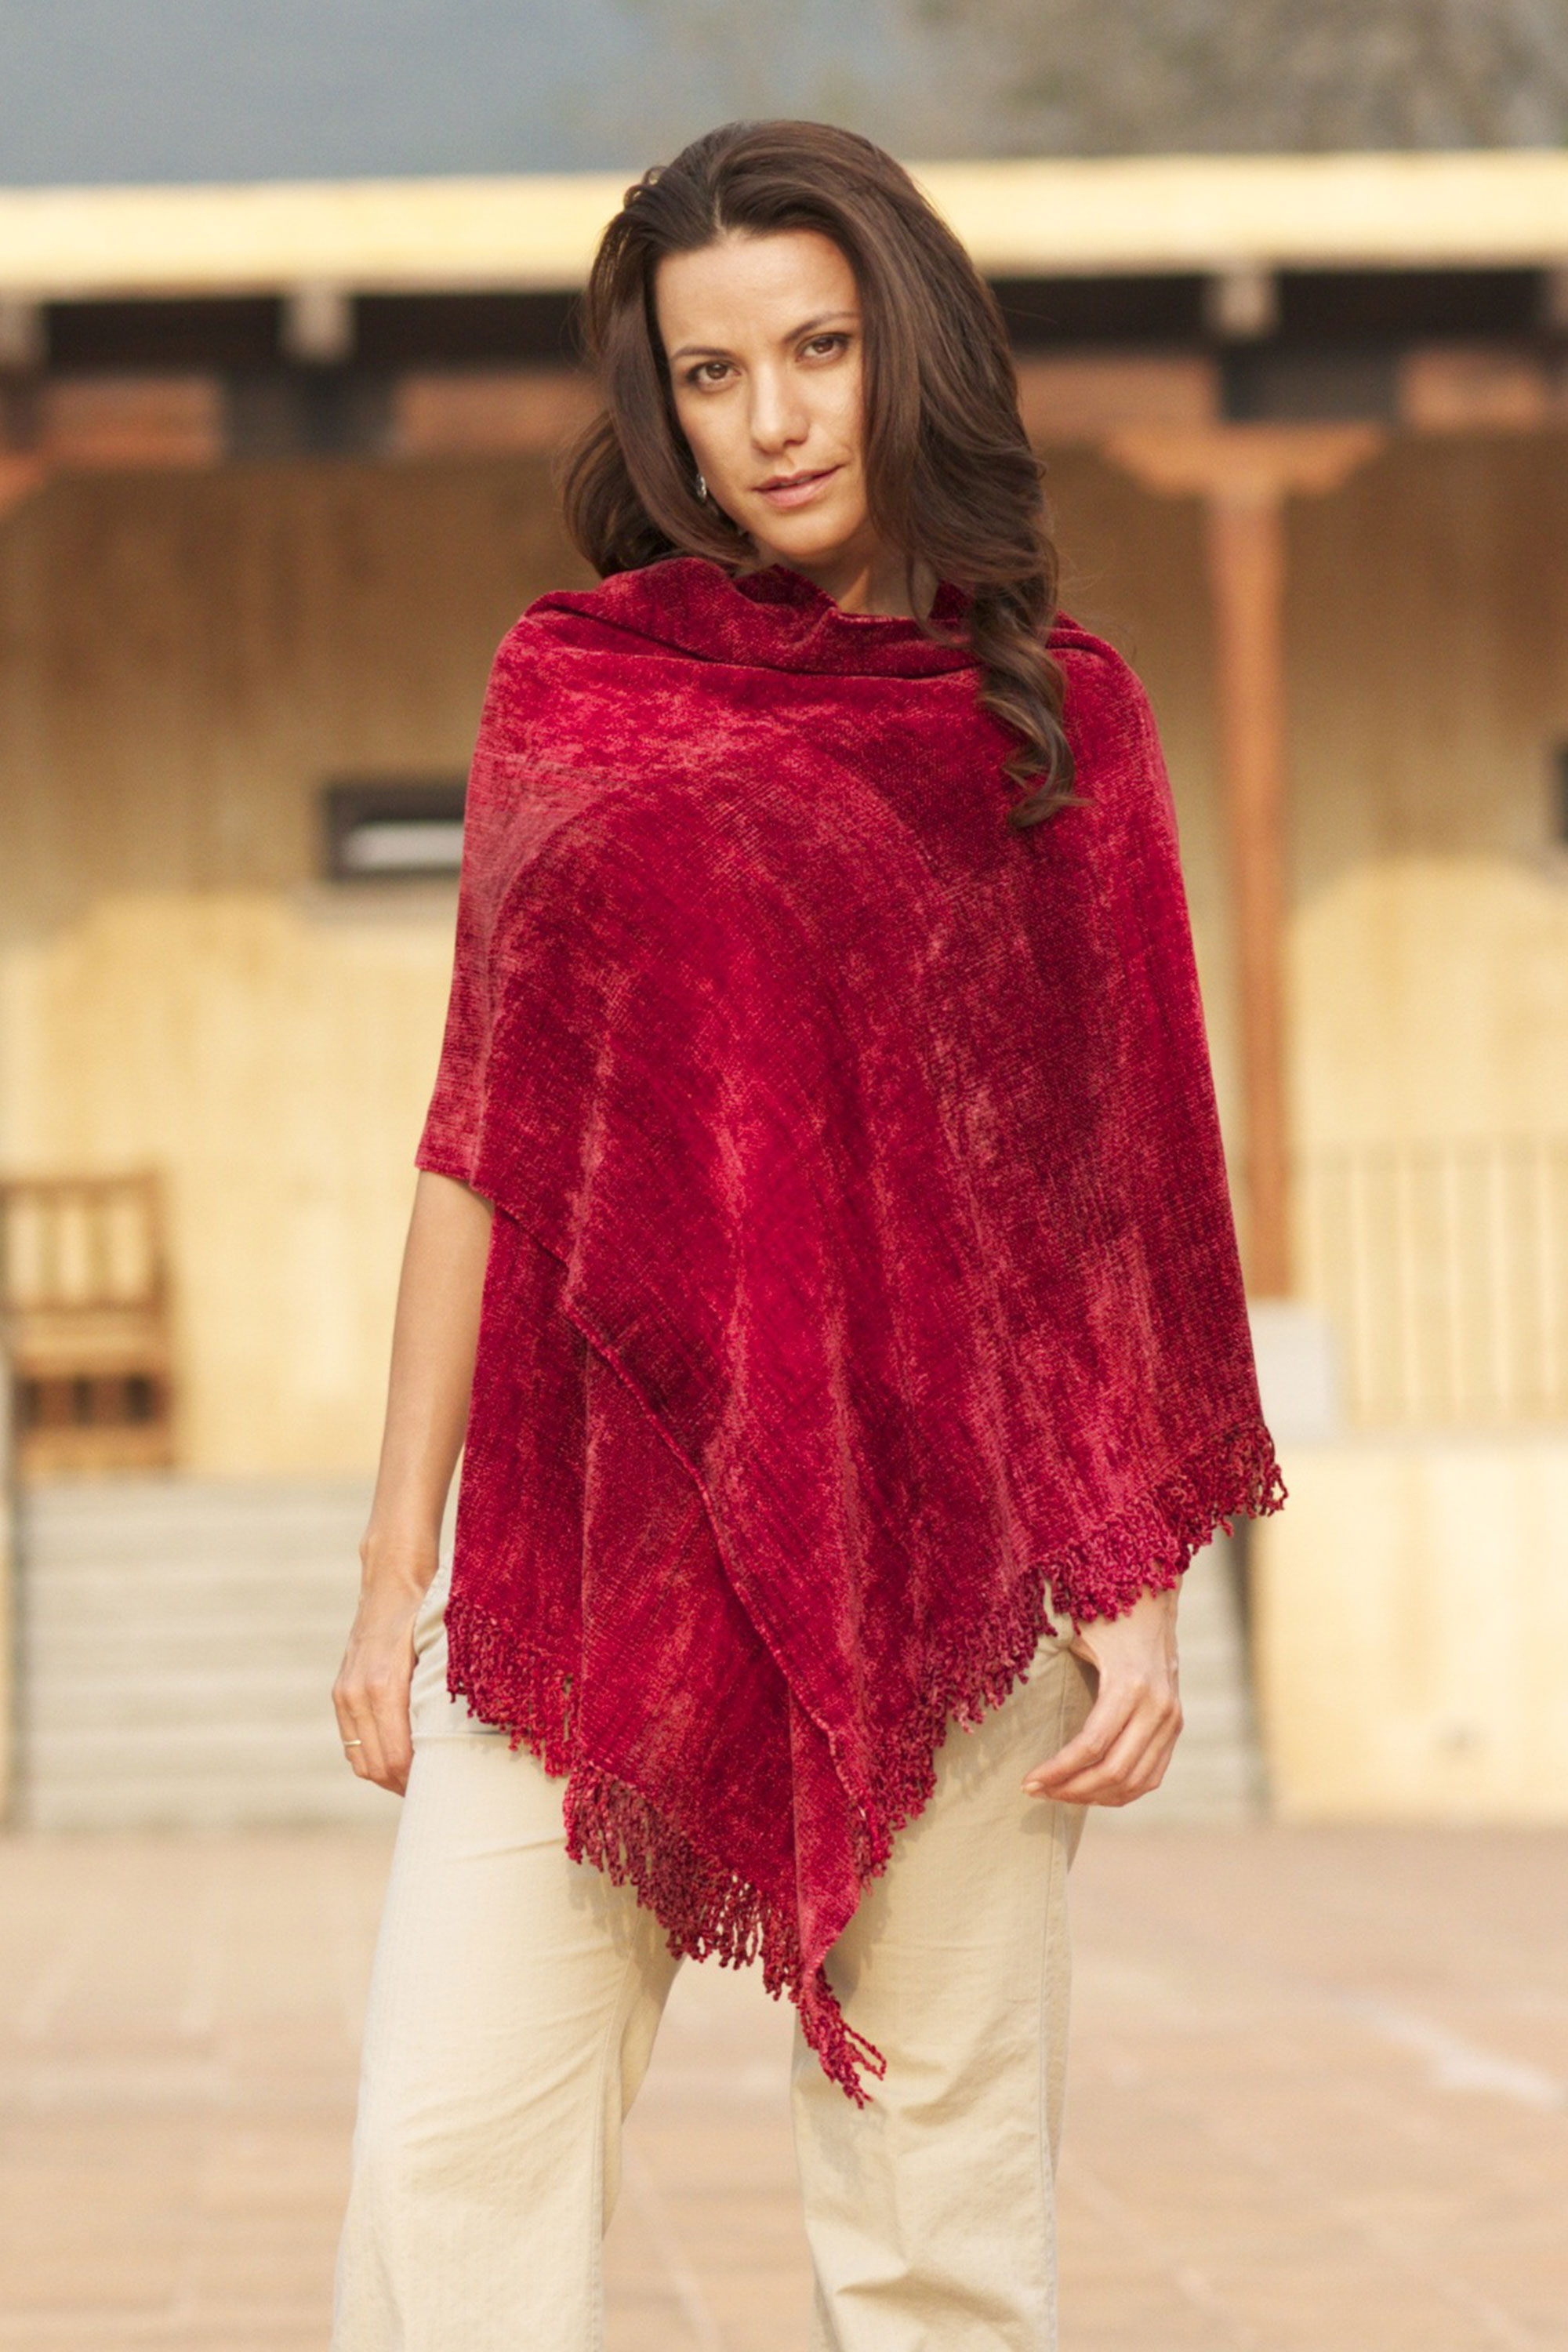 Rayon Chenille Patterned Women's Shawl, 'Tropical Volcano